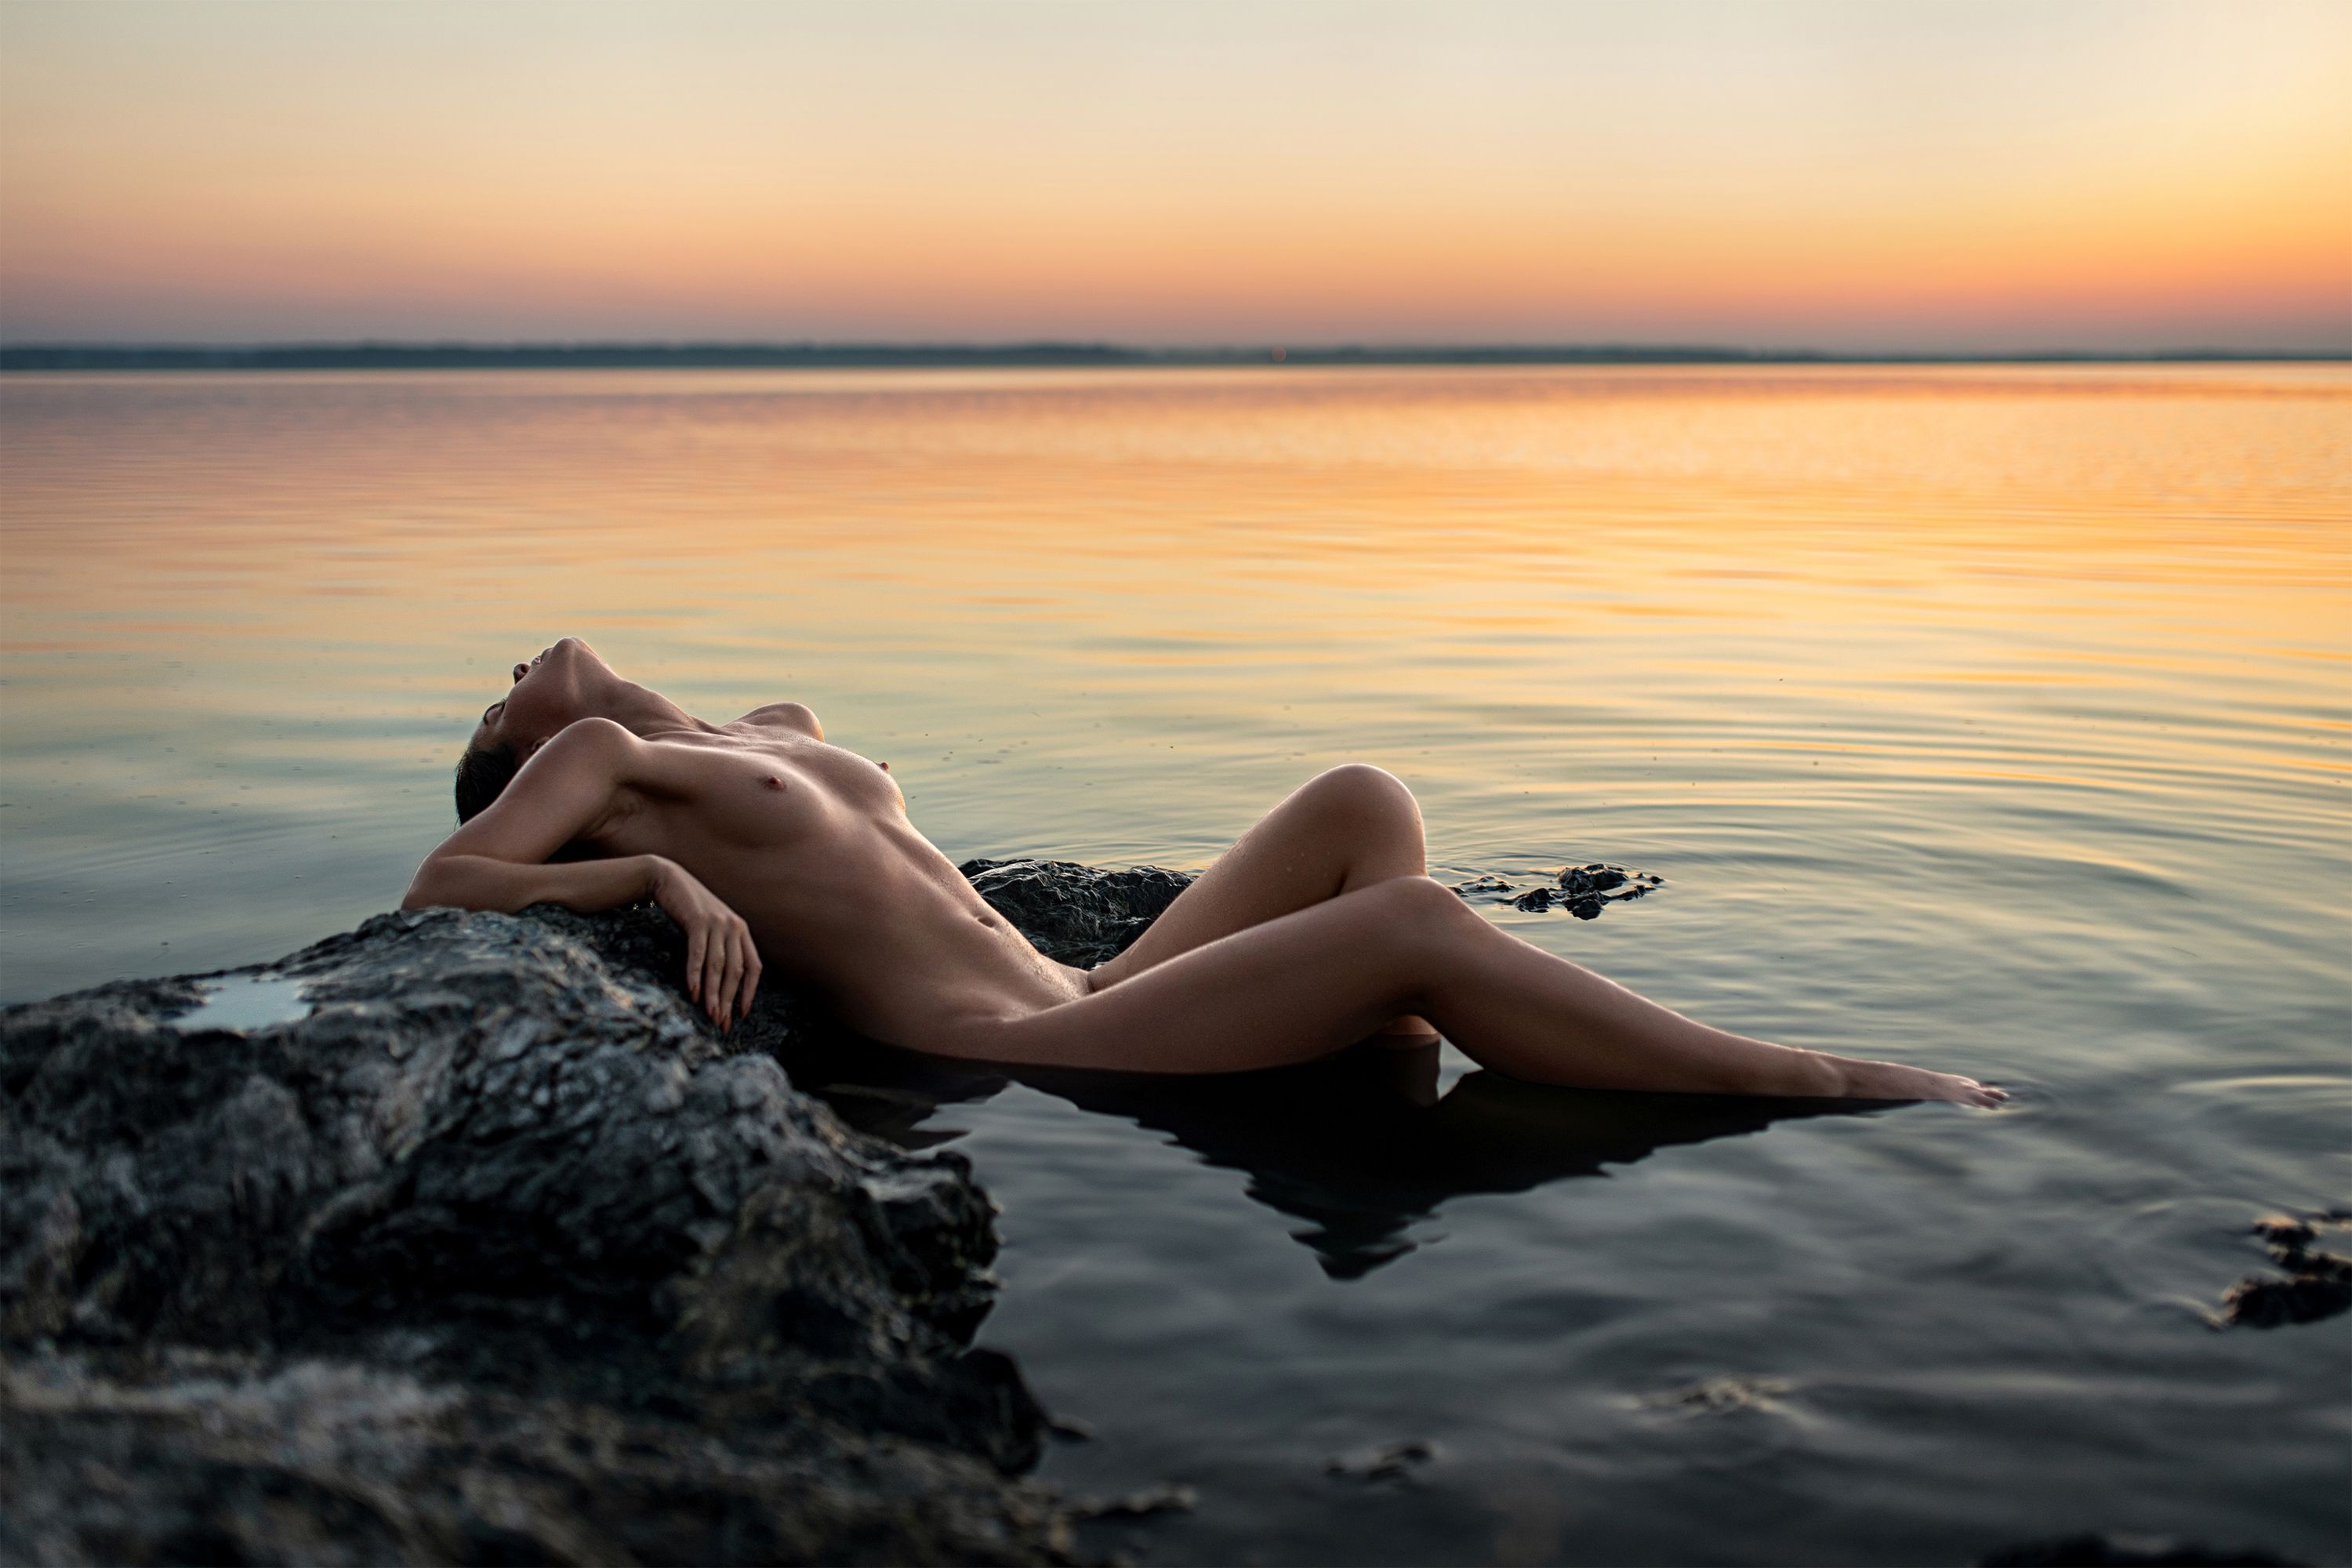 nude, naked, beauty, nature, girl, girle on the nature, portrait, sunset, lake, ню, обнаженная девушка, закат, озеро, фотосессия на природе, Кристина Савельева